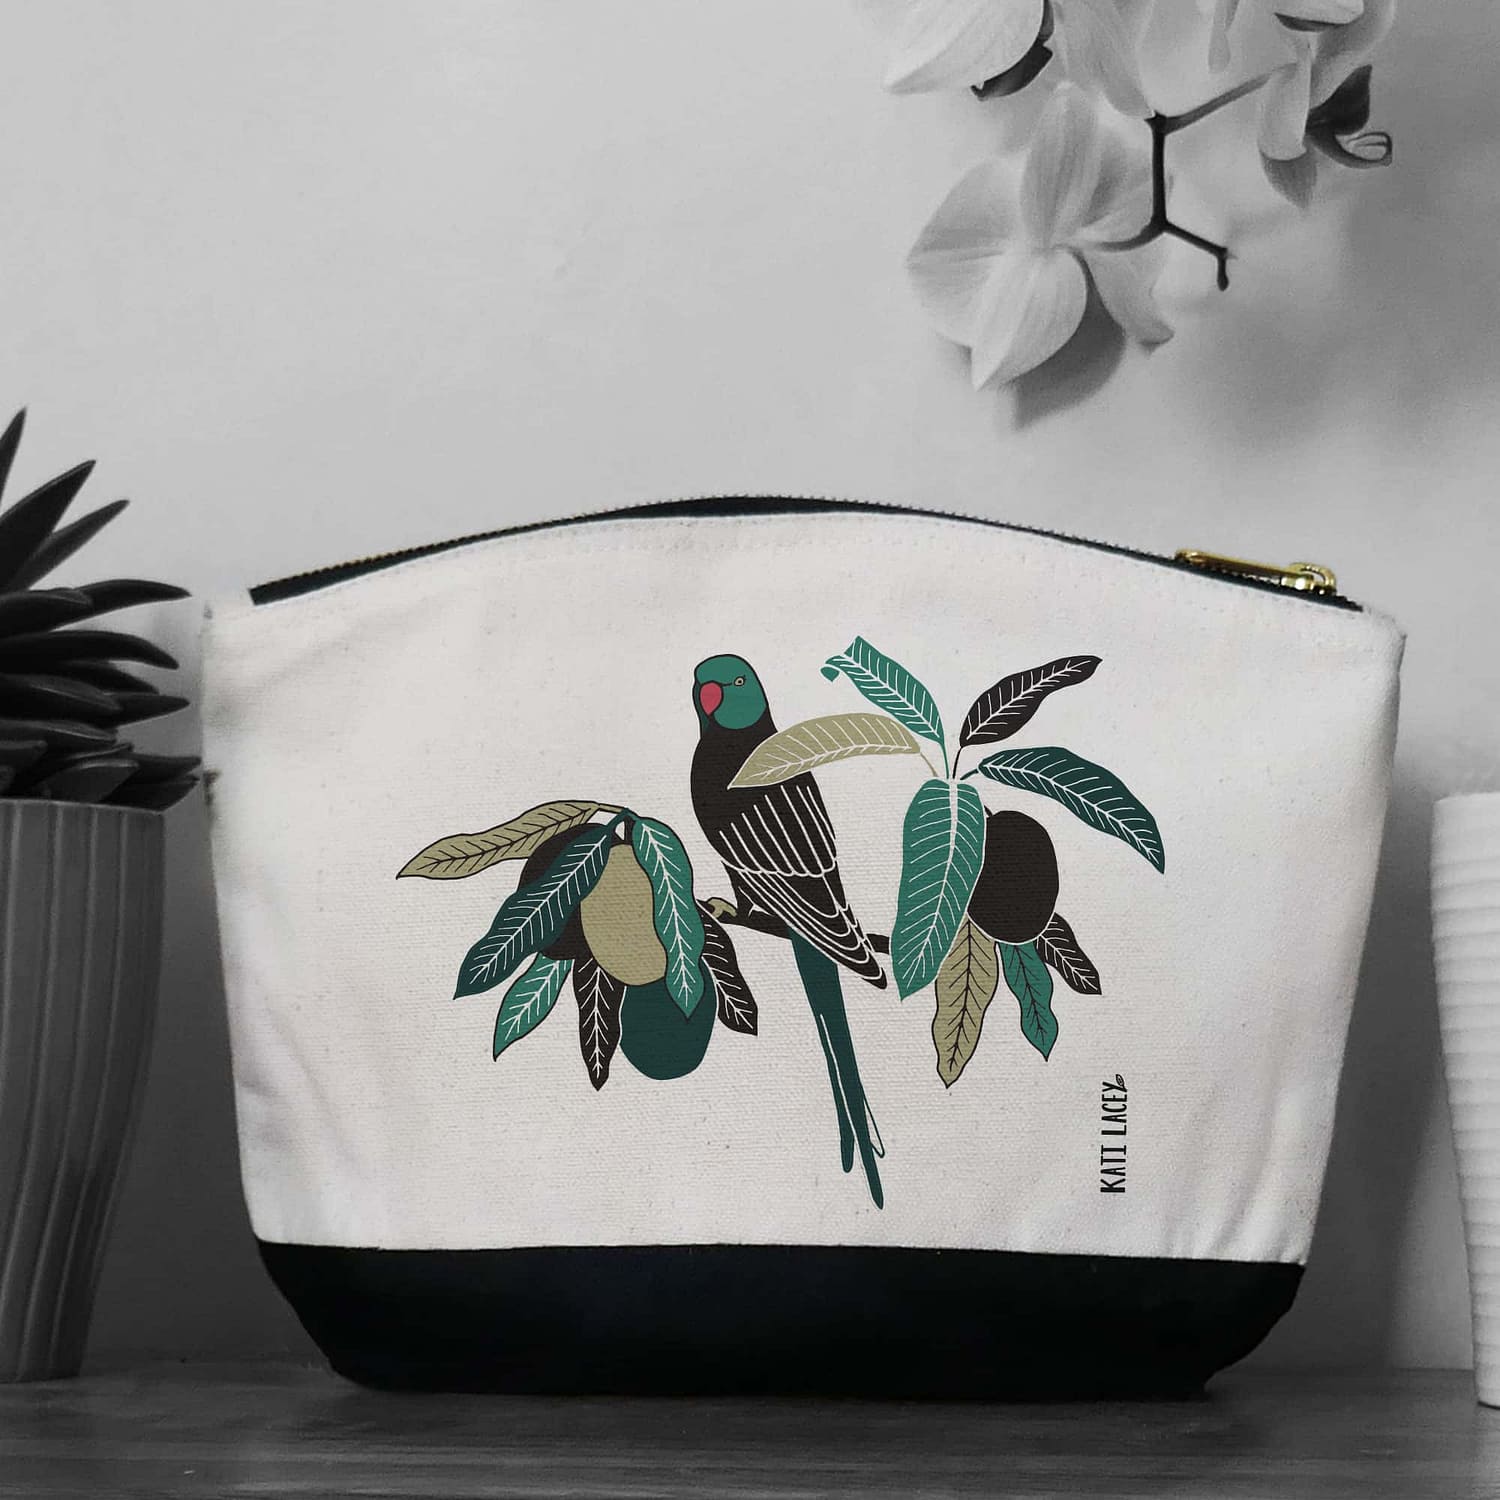 Parrot on pouch-washbag-toiletry bag-pencil case-make up bag-storage bag for travel-medication bag-pouch-luxury-eco-friendly cotton-sustainable